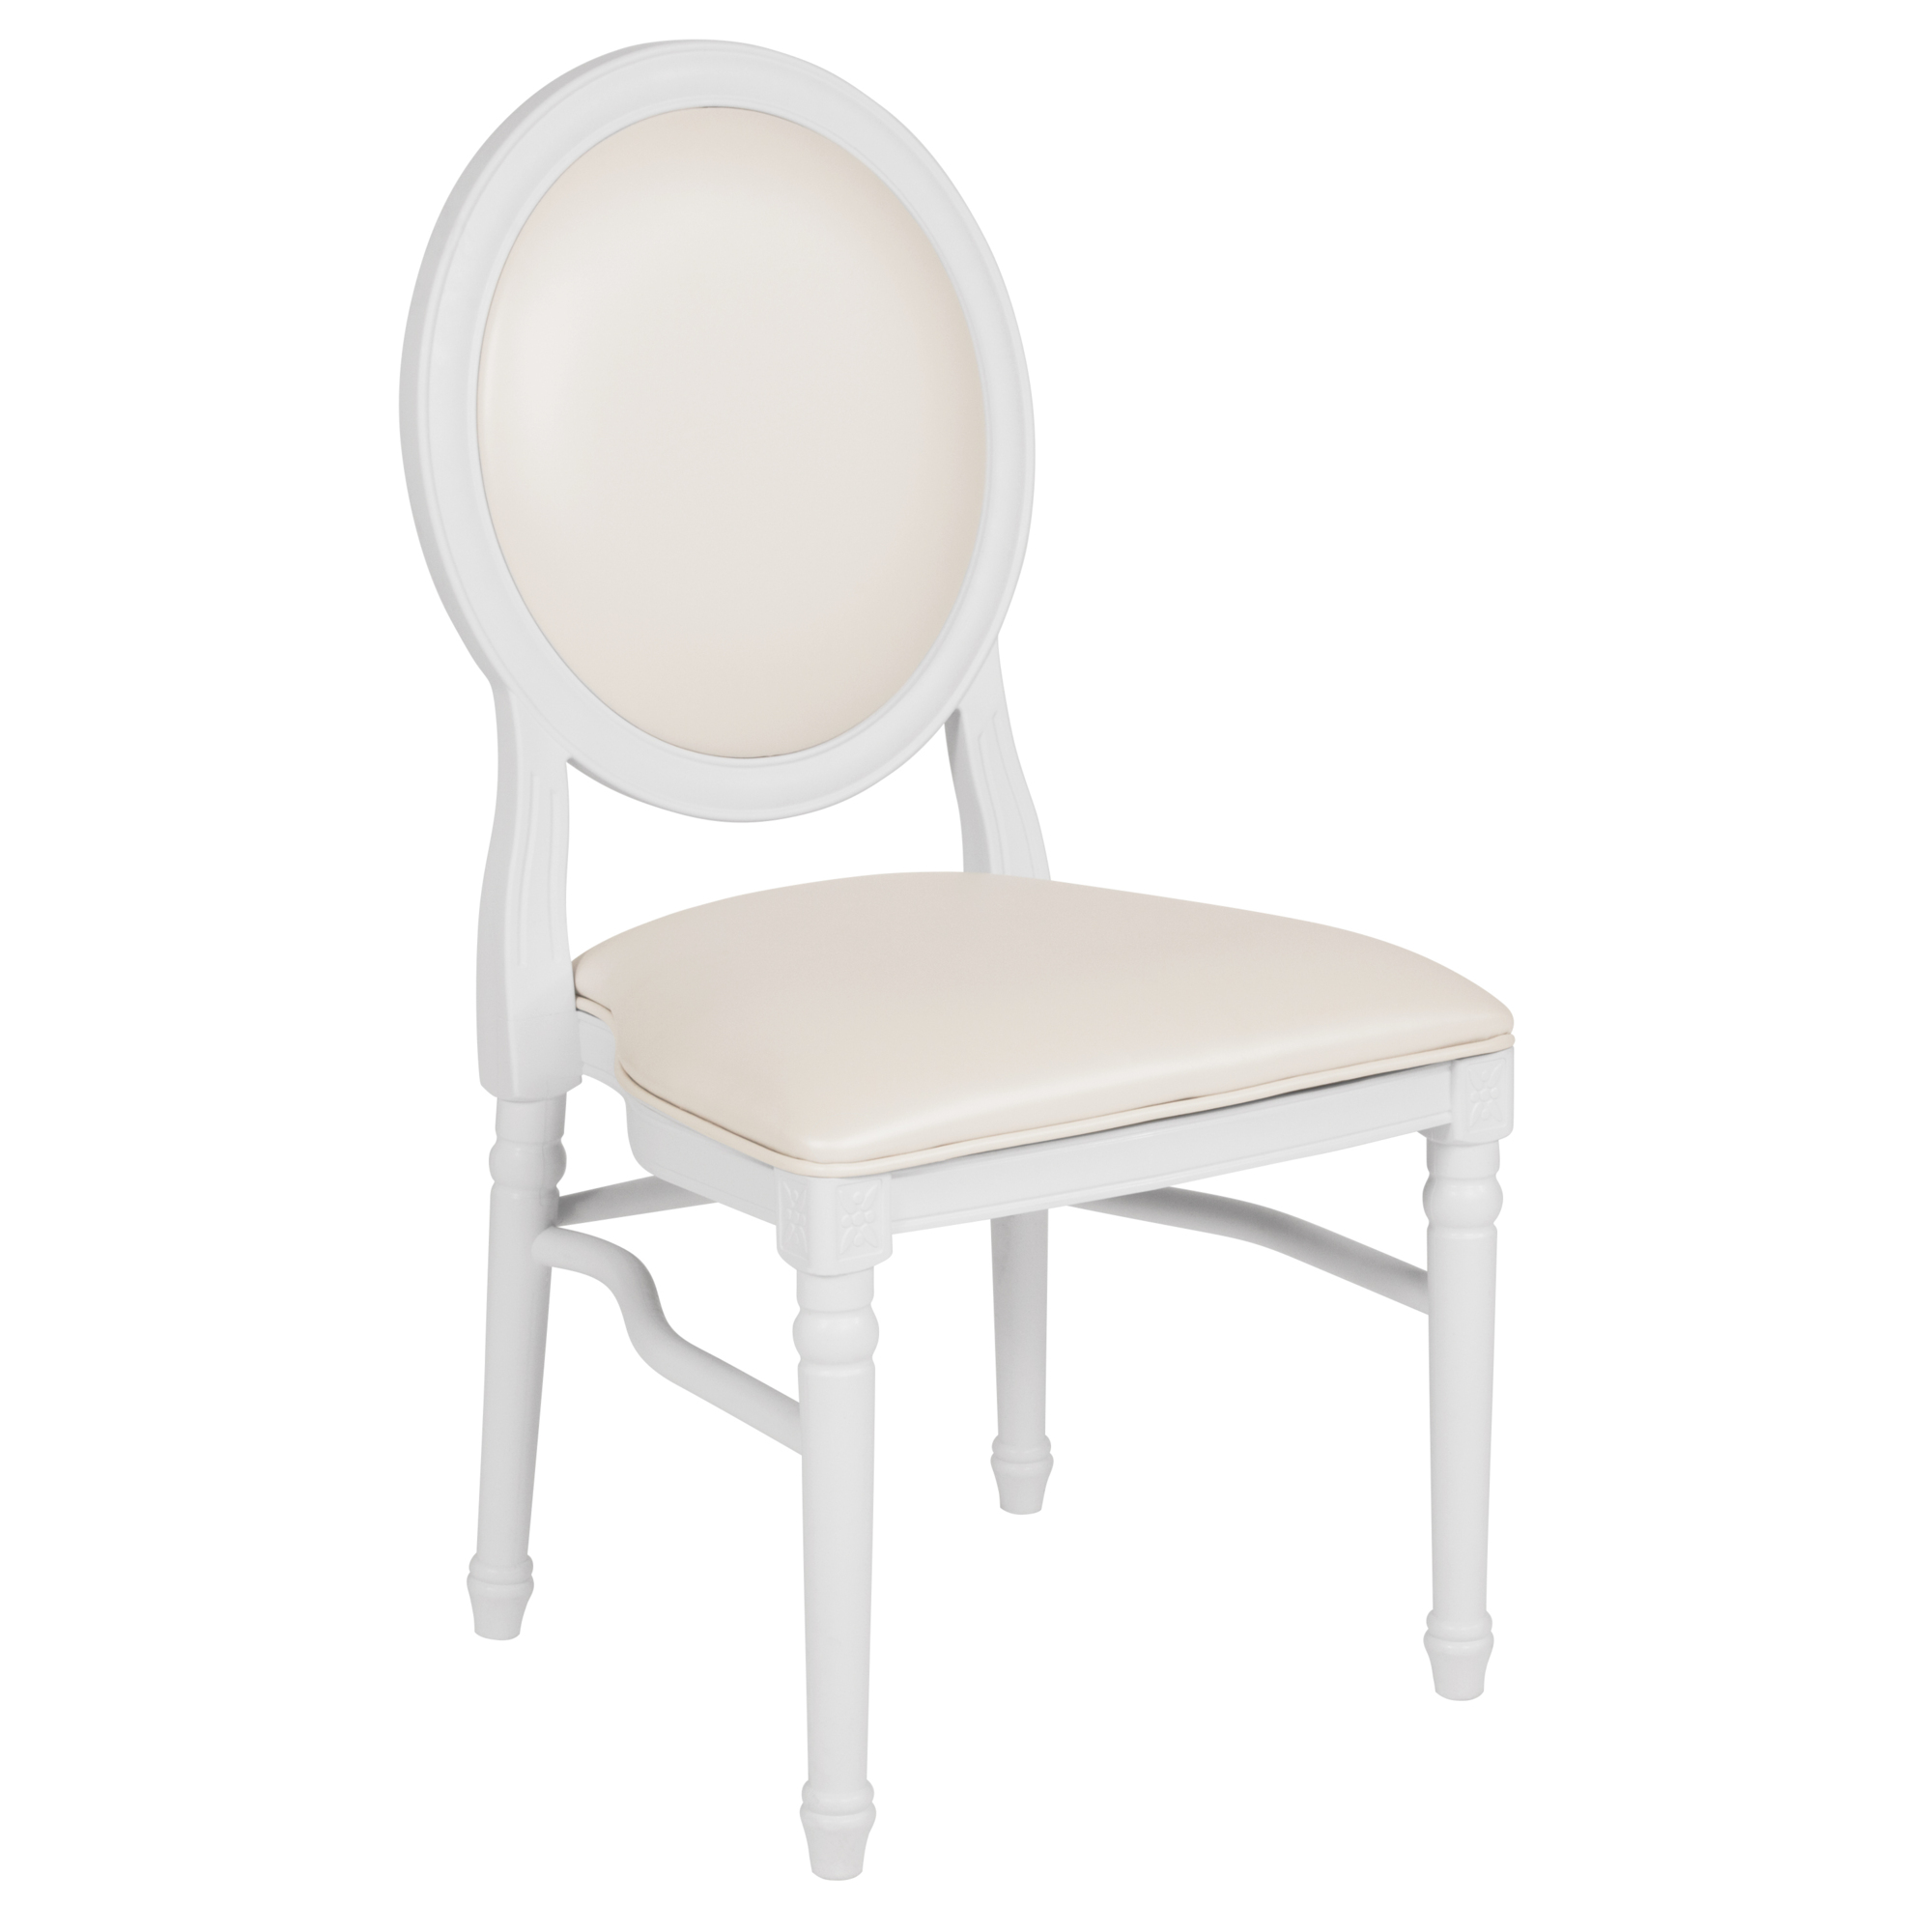 Flash Furniture, 900 lb. Rated Chair - White Seat and White Frame, Primary Color White, Included (qty.) 1, Model LEWWMON